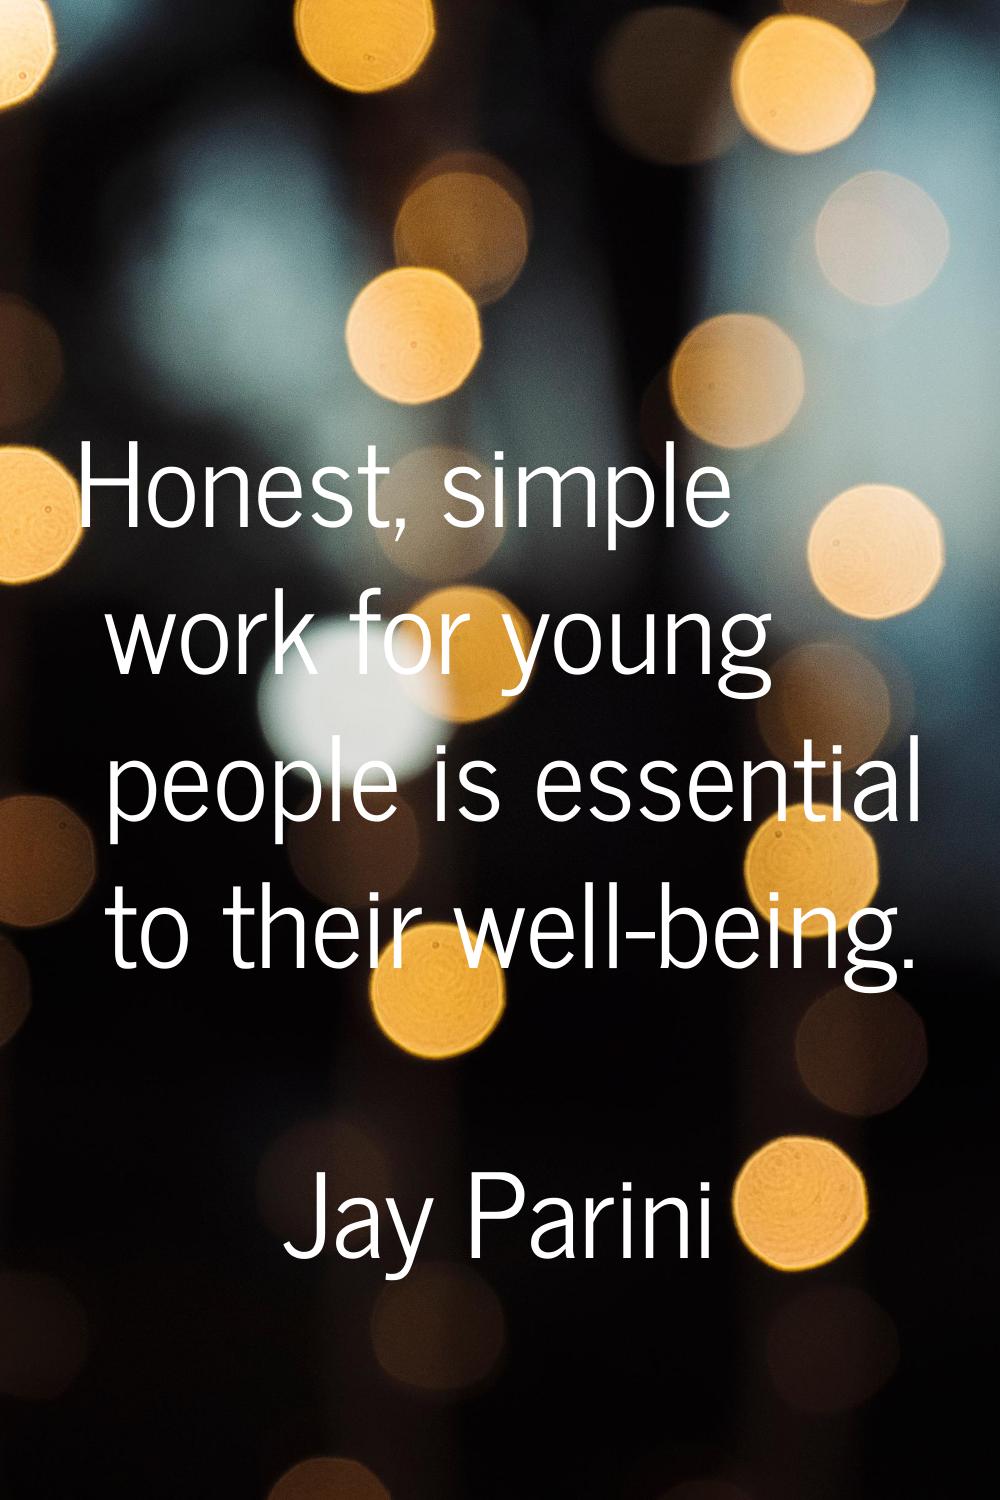 Honest, simple work for young people is essential to their well-being.